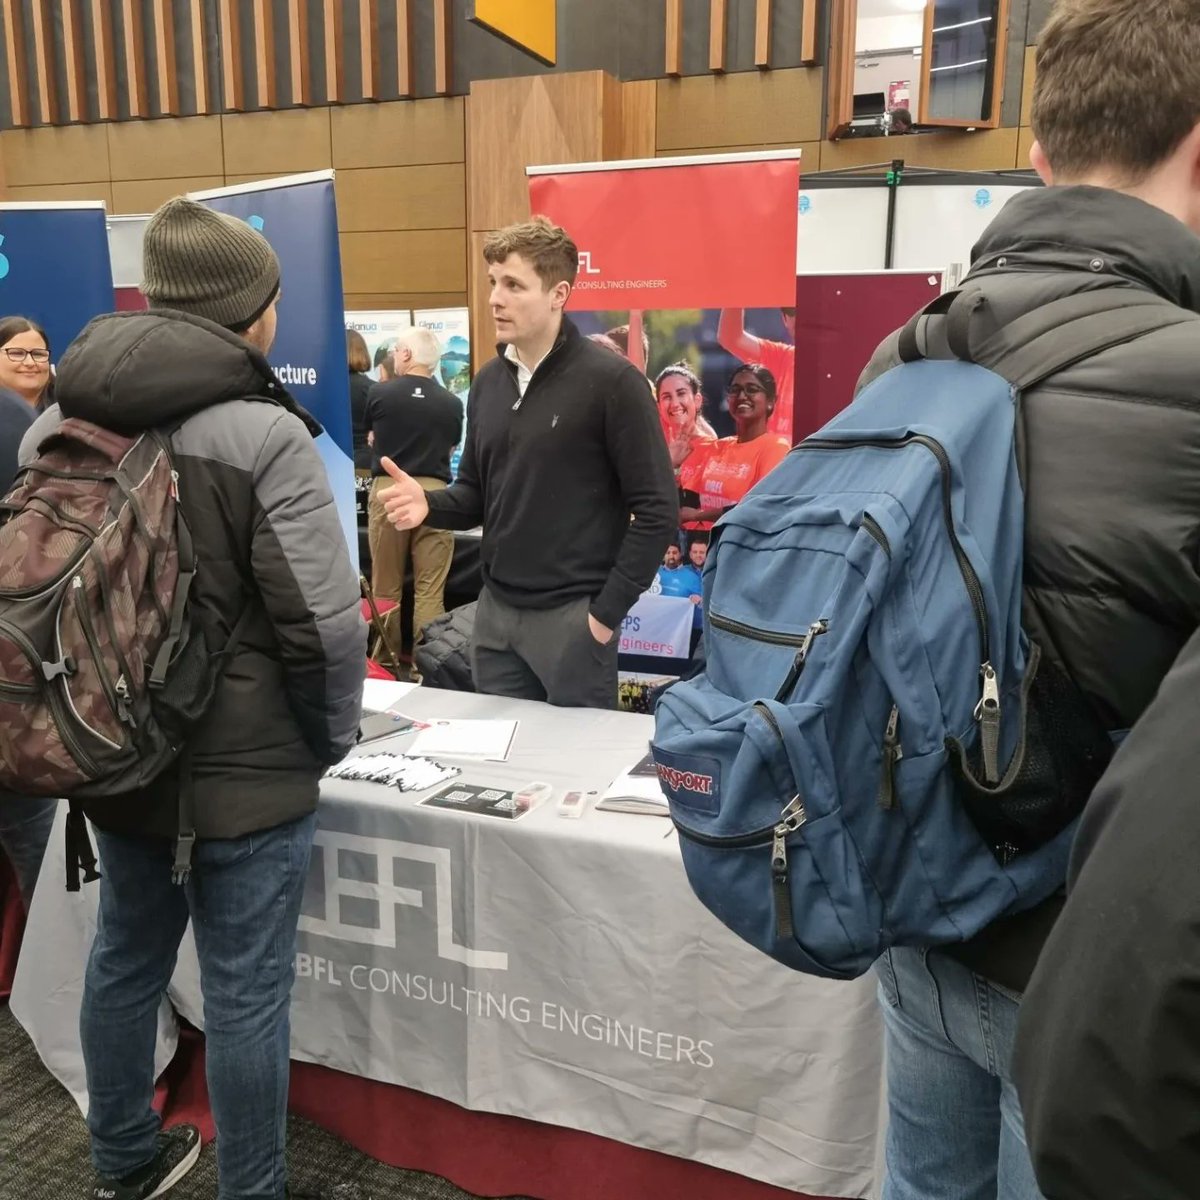 We are at the @uniofgalway Internships & Graduate Jobs Fair today. Come visit the DBFL stand between 11 and 3pm in the Bailey Allen Hall and find out more about our internship and graduate opportunities. dbfl.ie/graduate-devel… dbfl.ie/dbfl-internshi… #GraduateJobsFair #dbfl